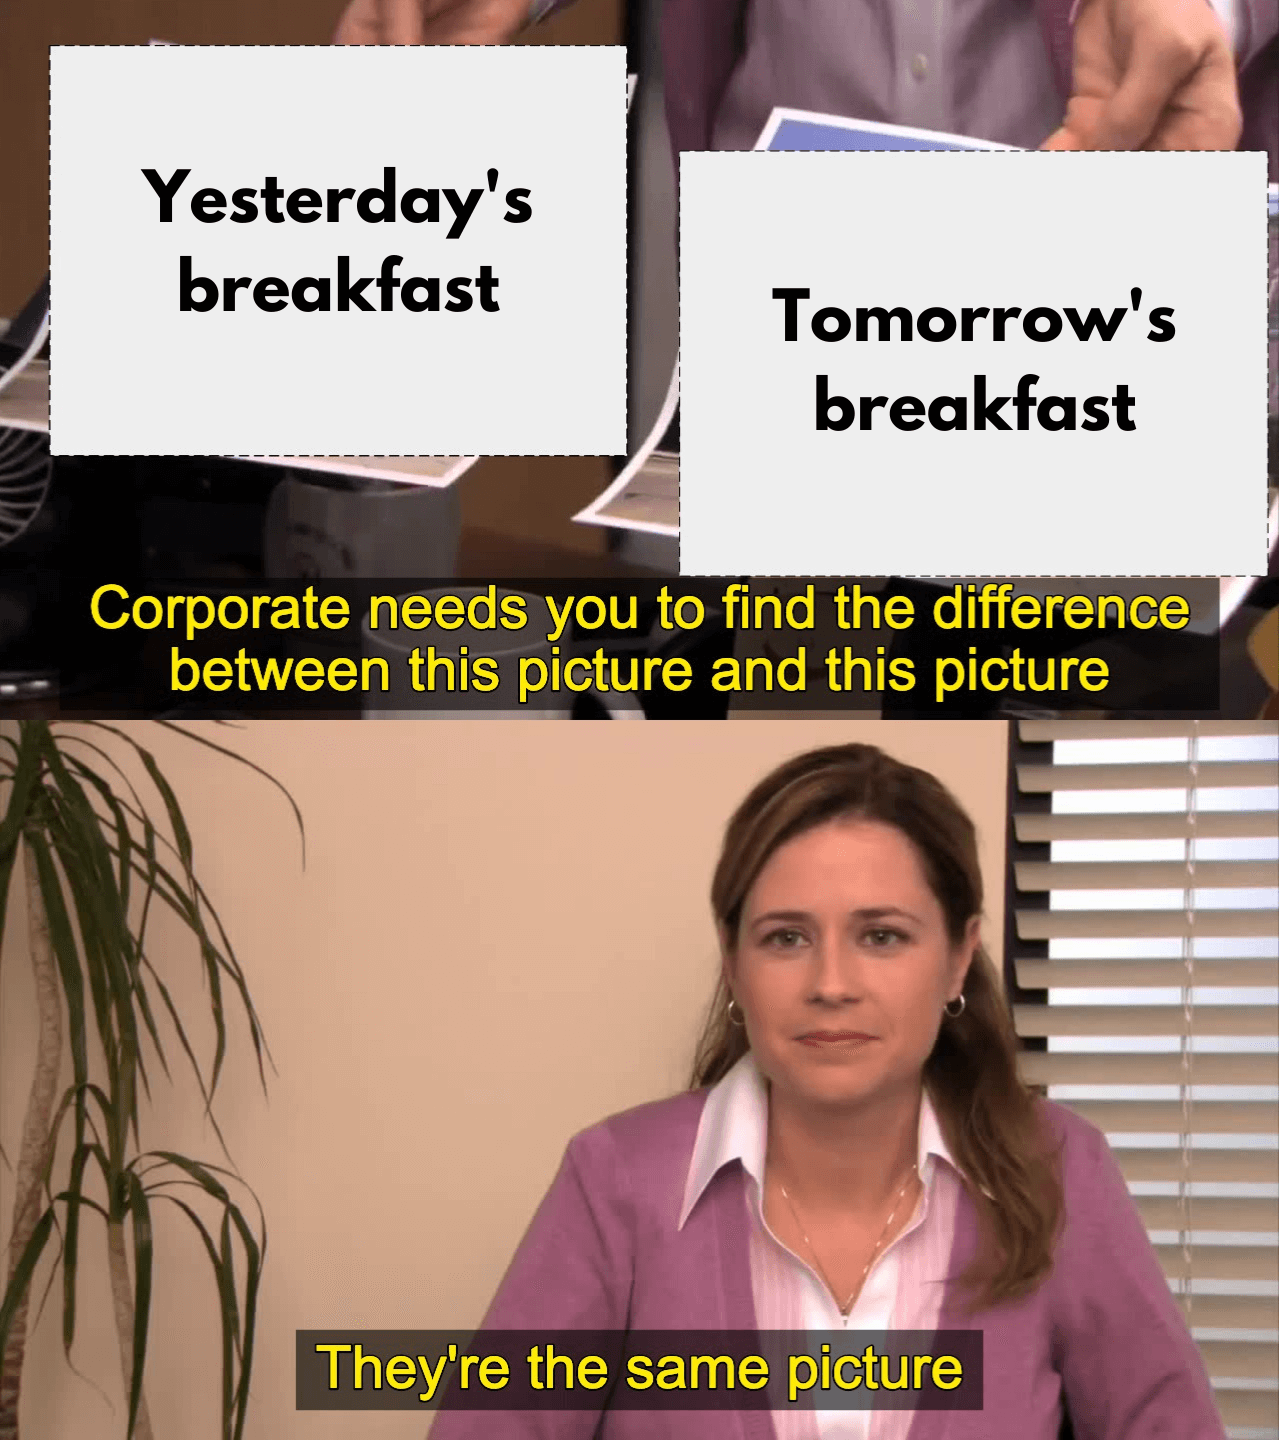 The office meme with 2 panels. Panel 1: corporate needs you to find the difference between this picture and this picture. (the pictures say yesterday's breakfast and tomorrow's breakfast) Panel 2: They're the same picture.